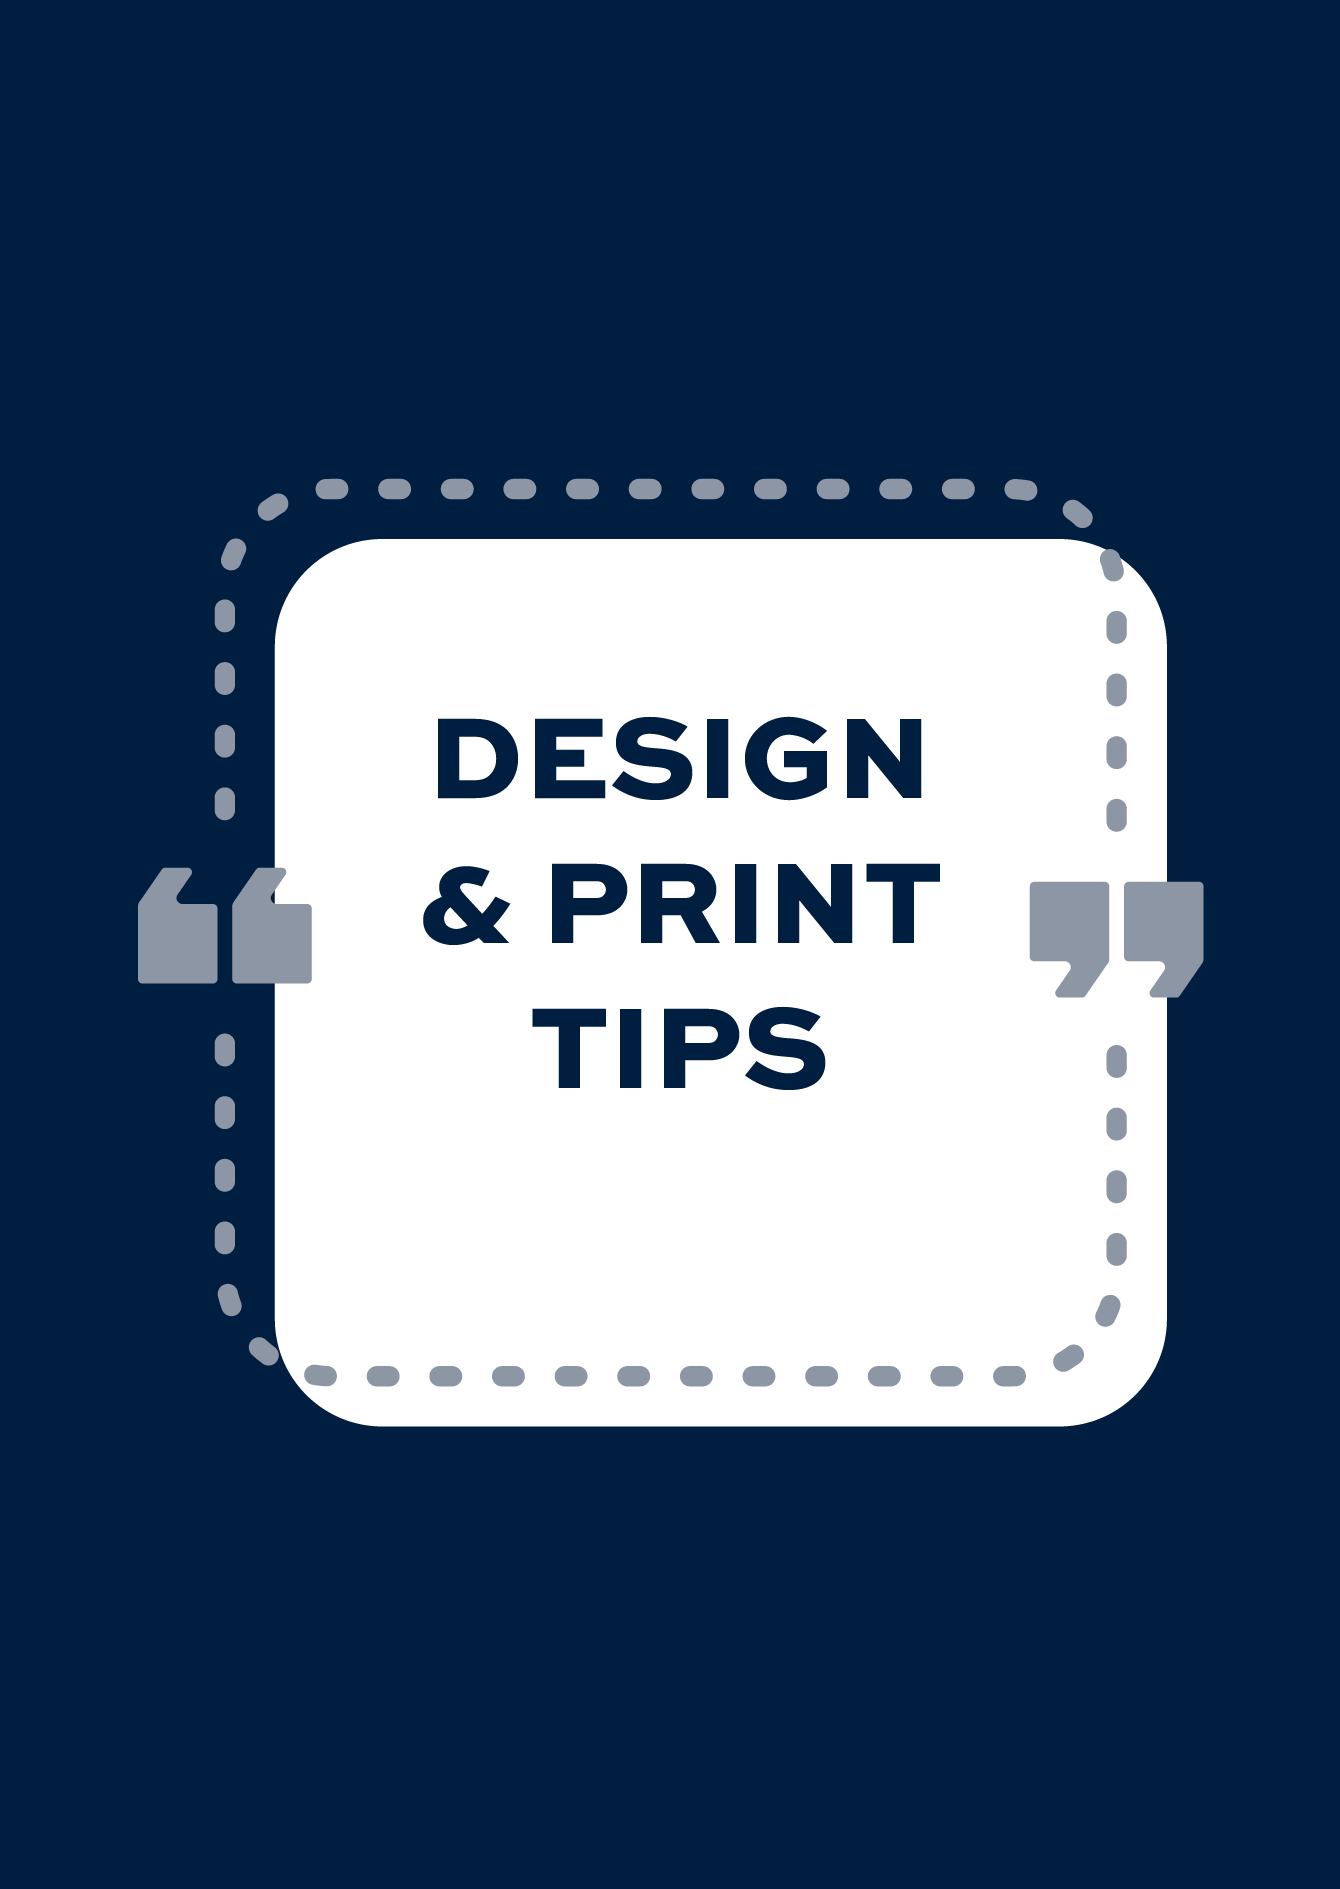 Design and Print Tips